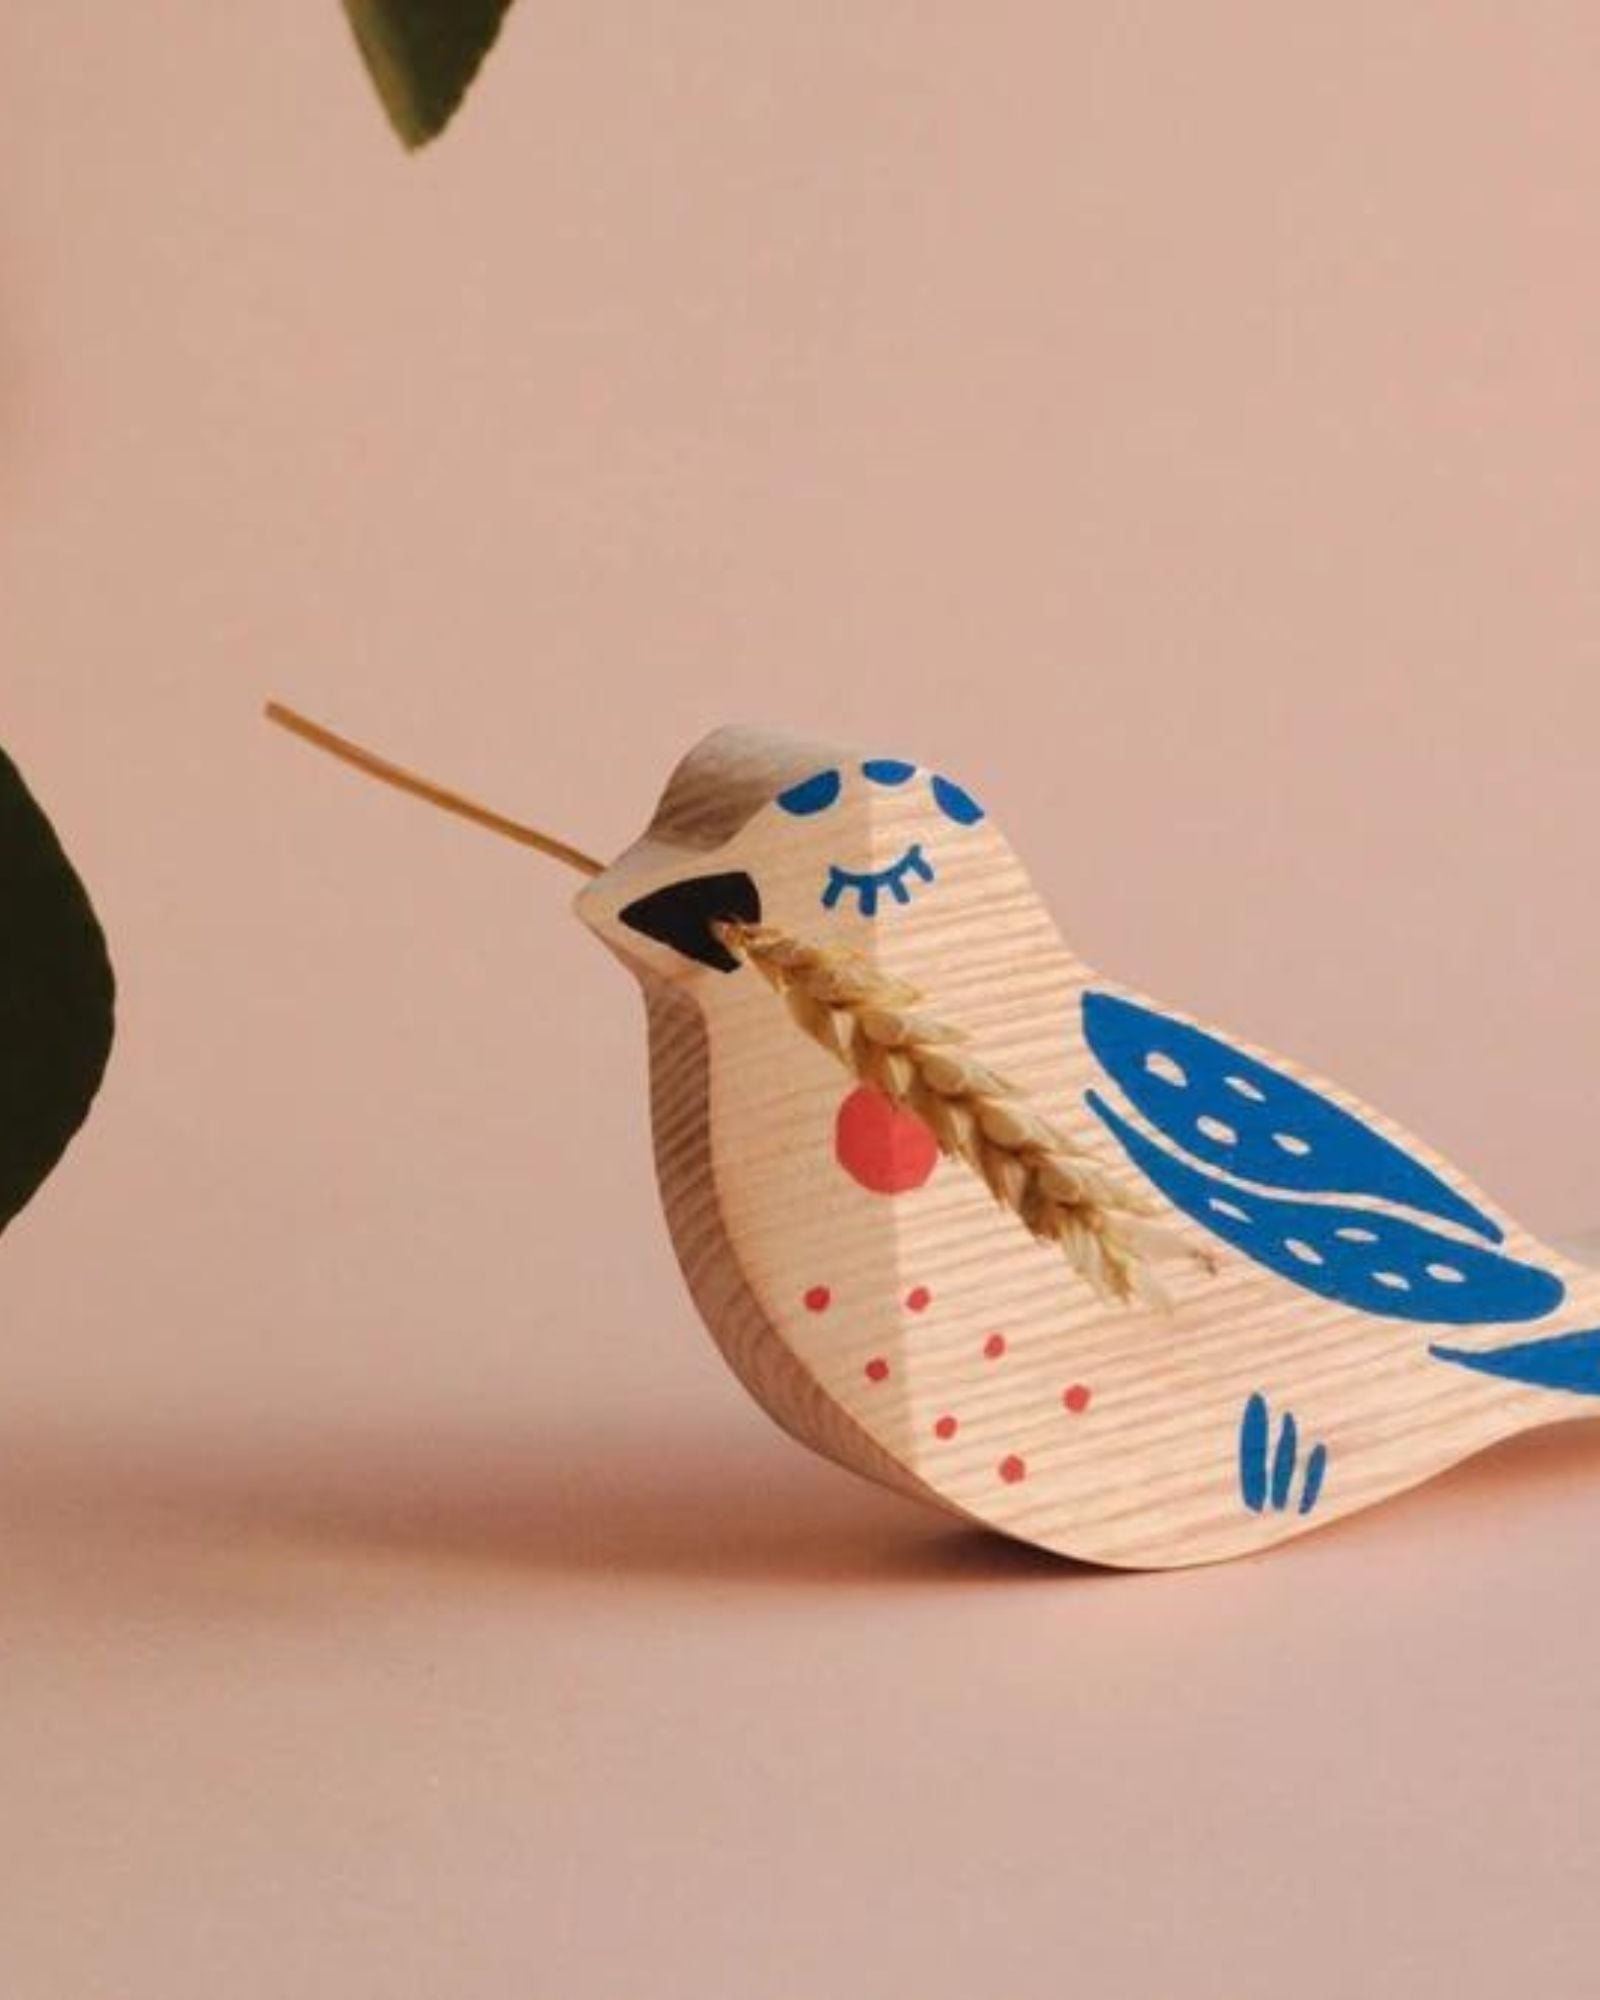 Eco-friendly gift: Hand-painted French ash bird sculpture